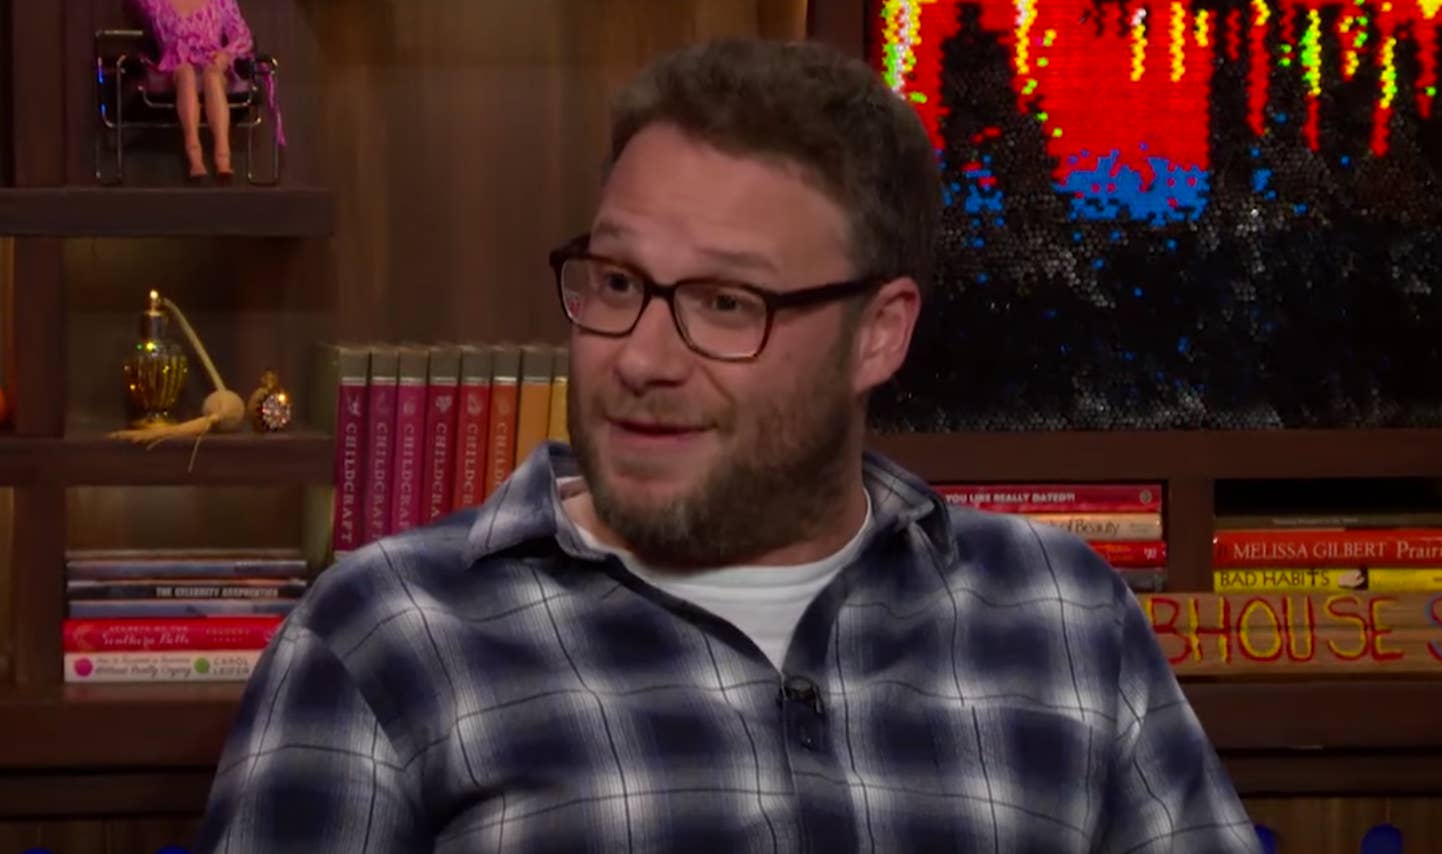 Seth Rogen compares Bieber and Bloom body parts.